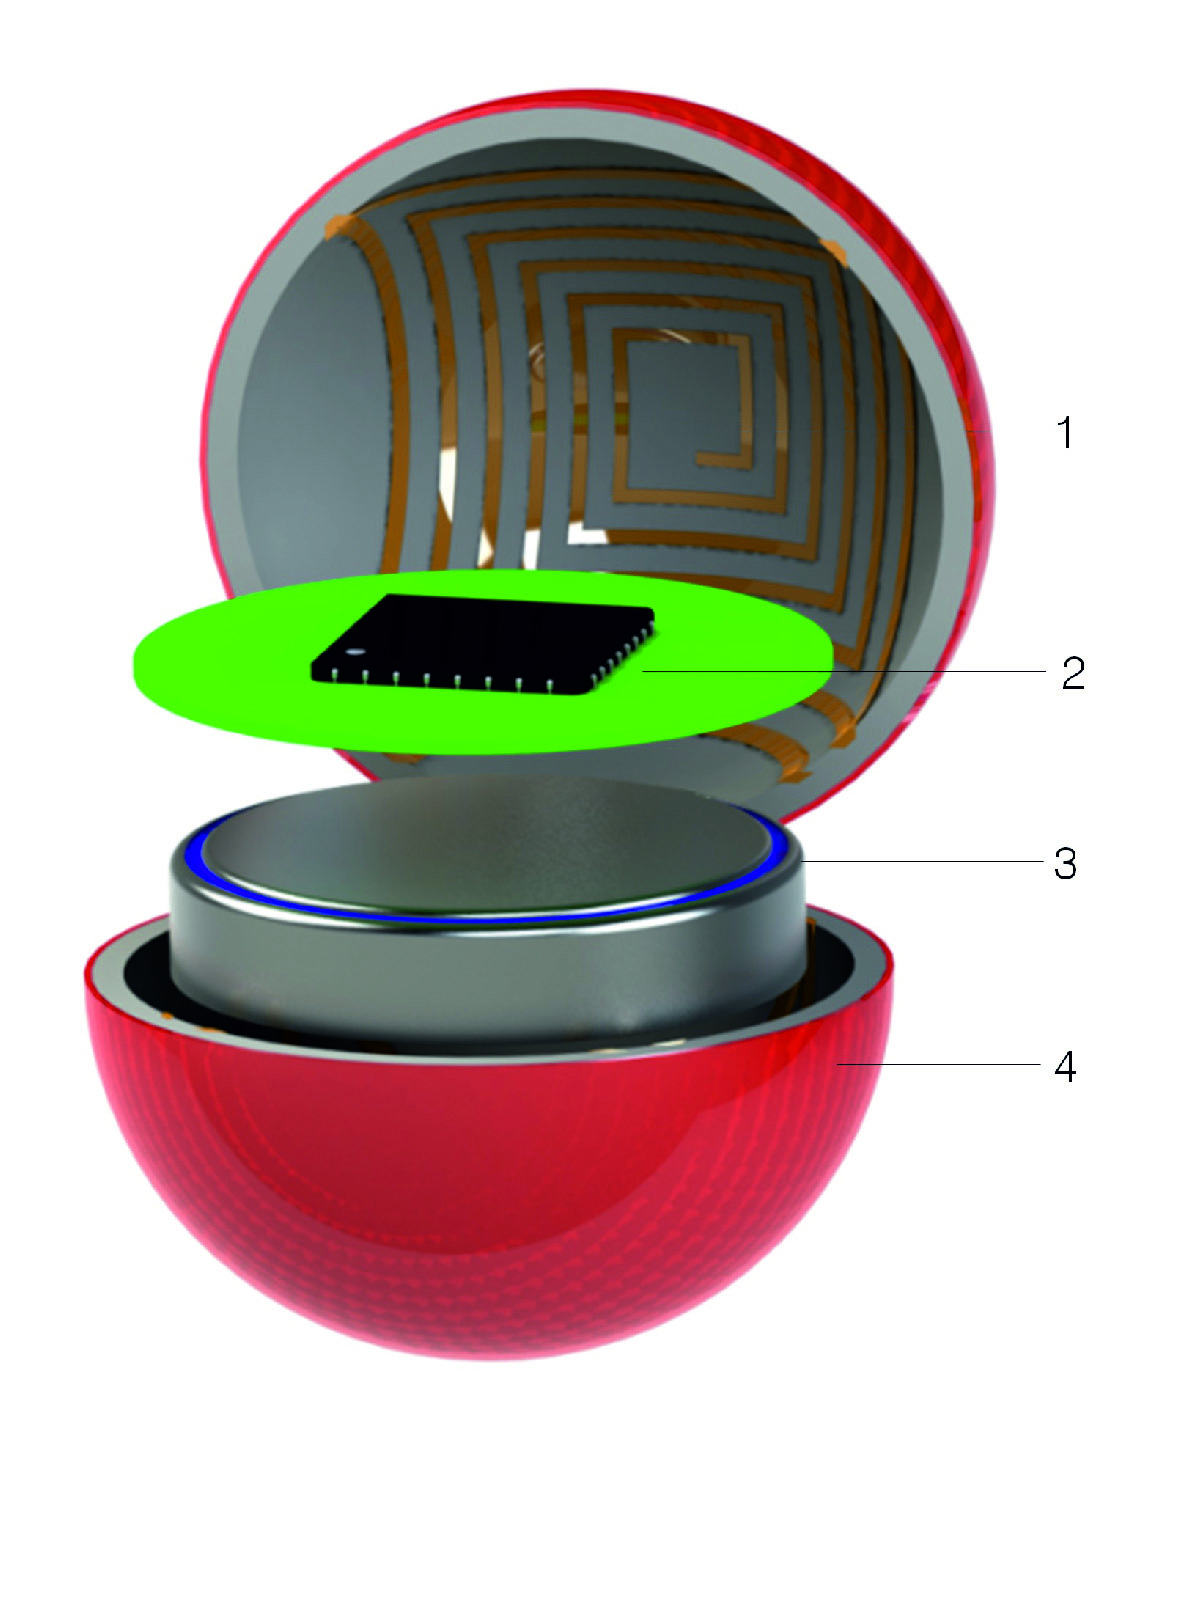 The structure of the Sens-o-Spheres: 1) Energy receiver, 2) Signal processing,  3) Rechargeable battery,  4) Encapsulation.